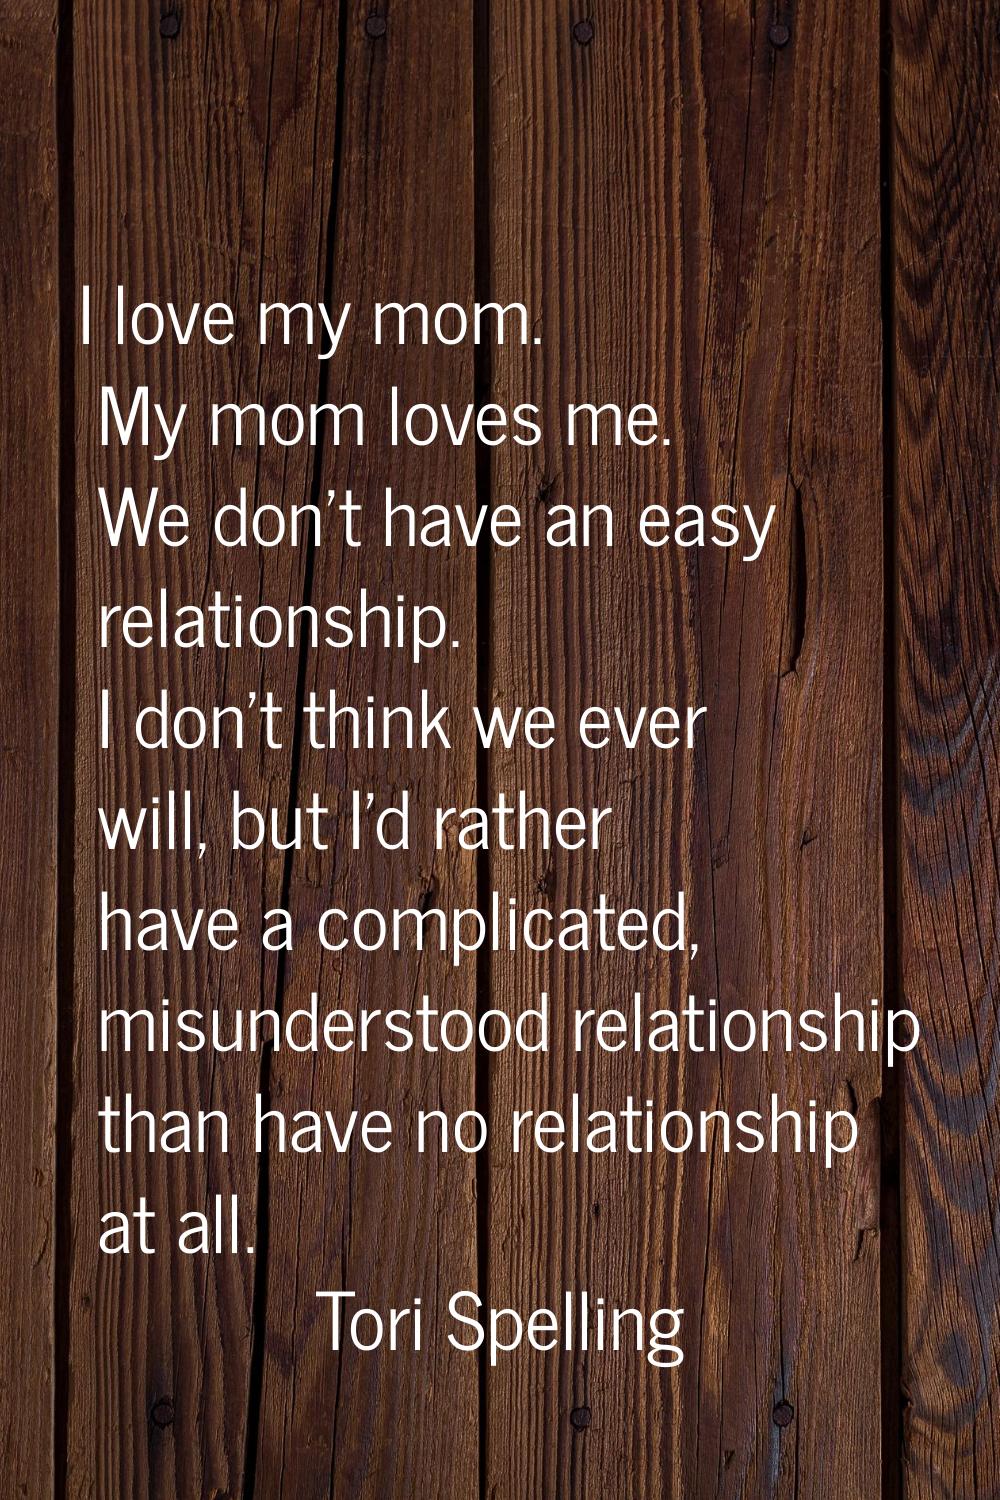 I love my mom. My mom loves me. We don't have an easy relationship. I don't think we ever will, but